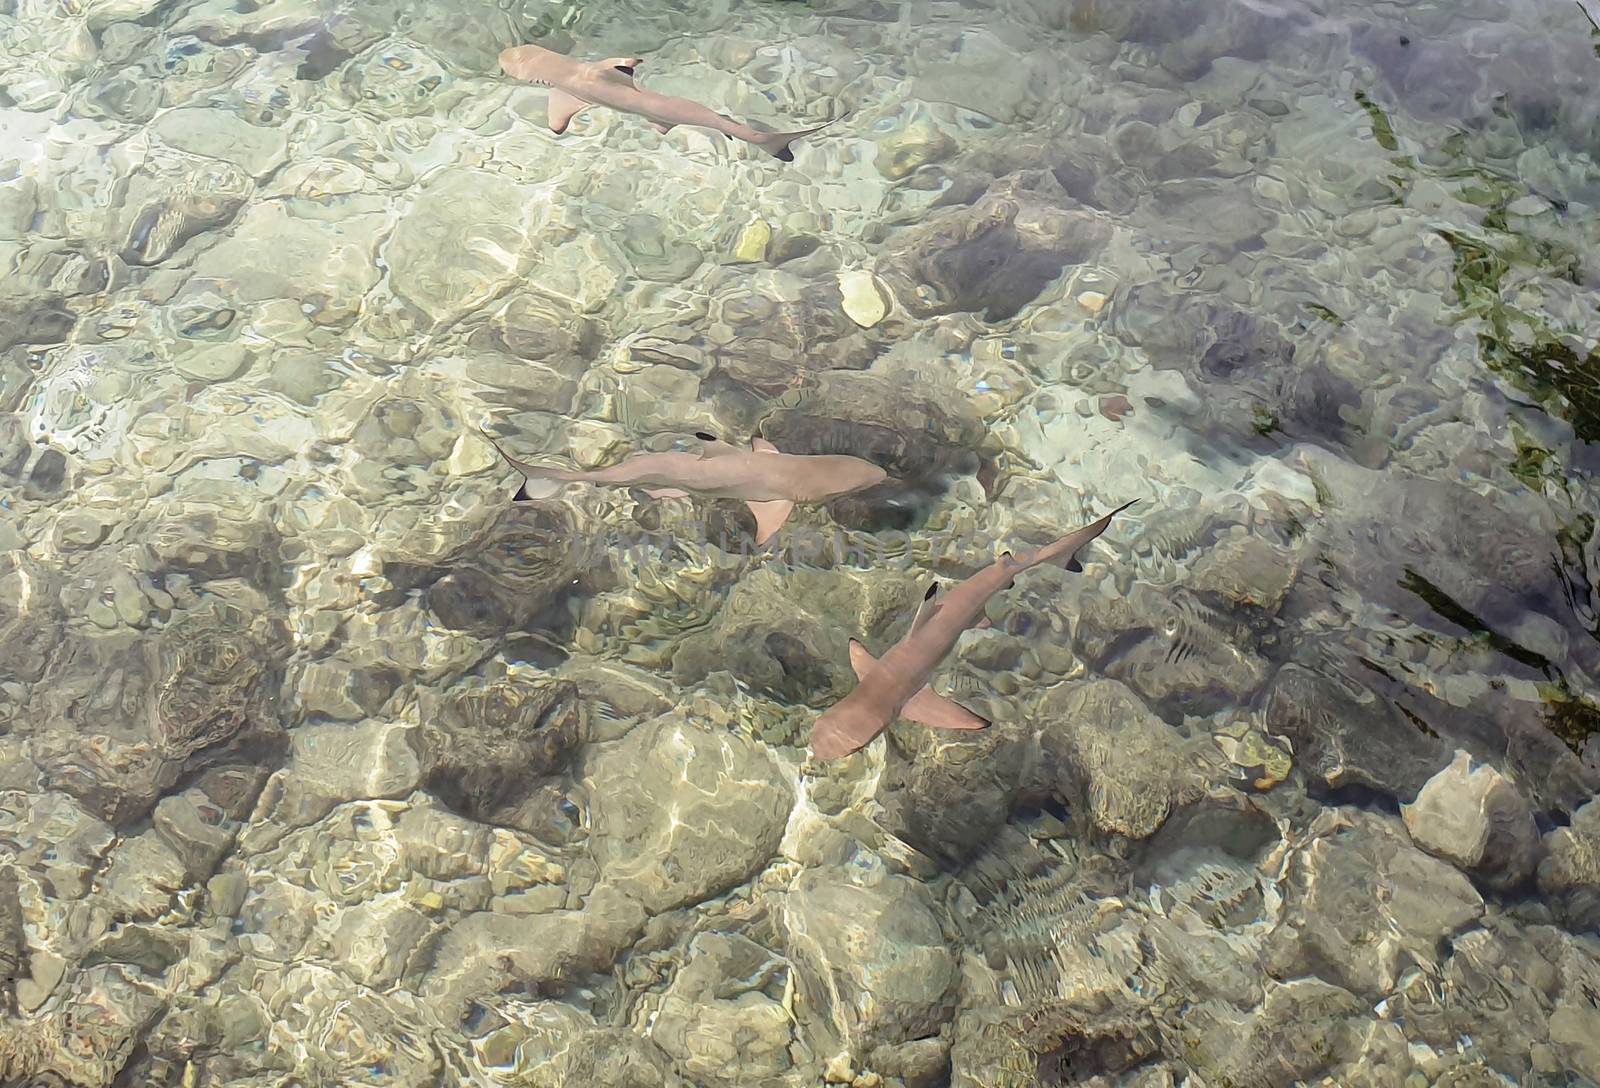 Reef sharks swim in shallow water